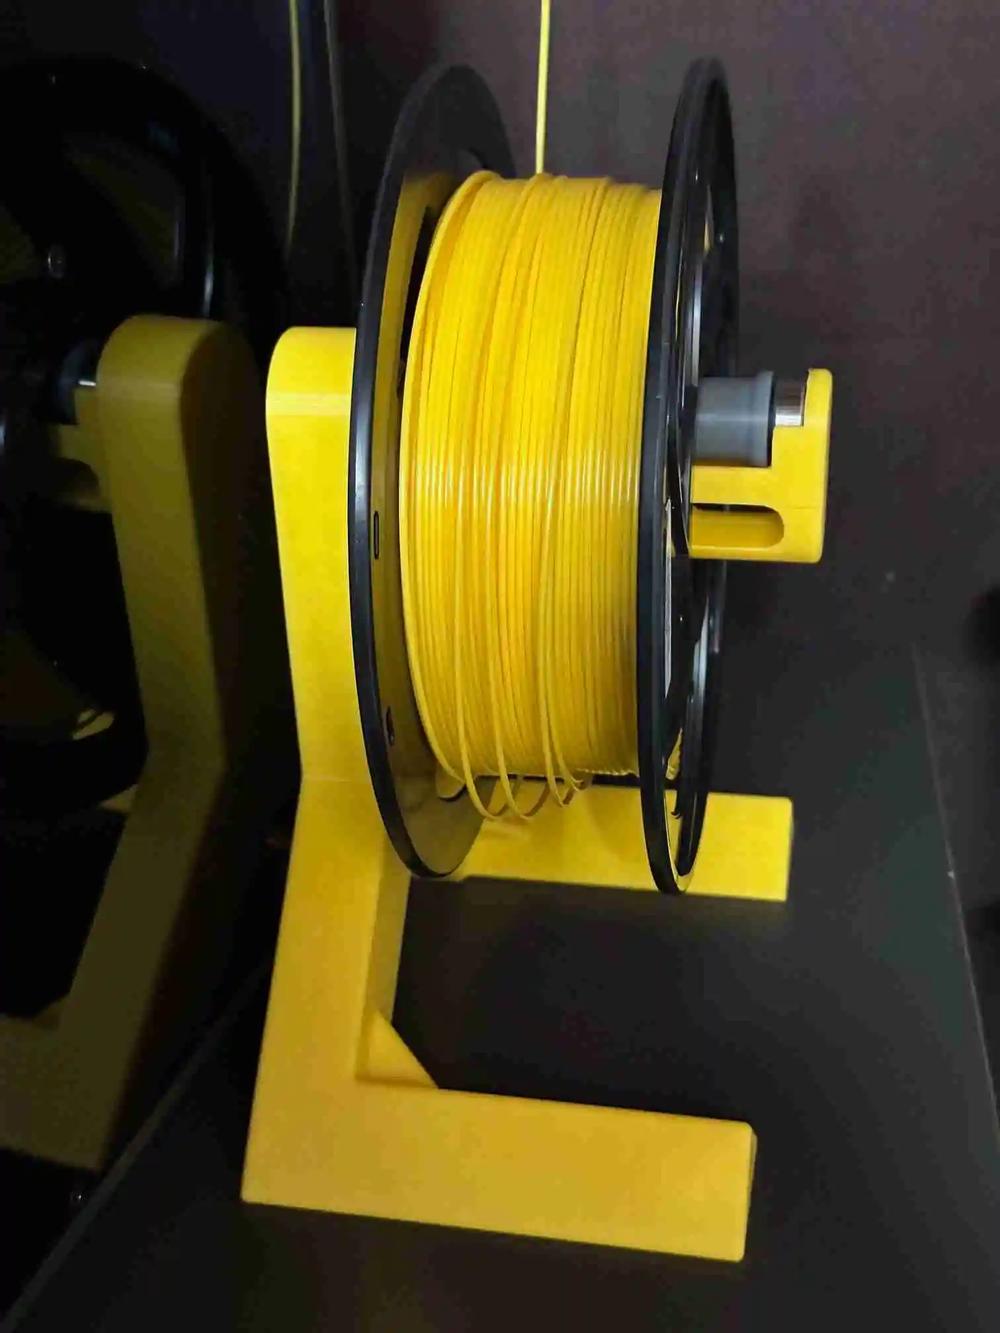 A yellow plastic spool holder for 3D printers, holding a spool of yellow filament.